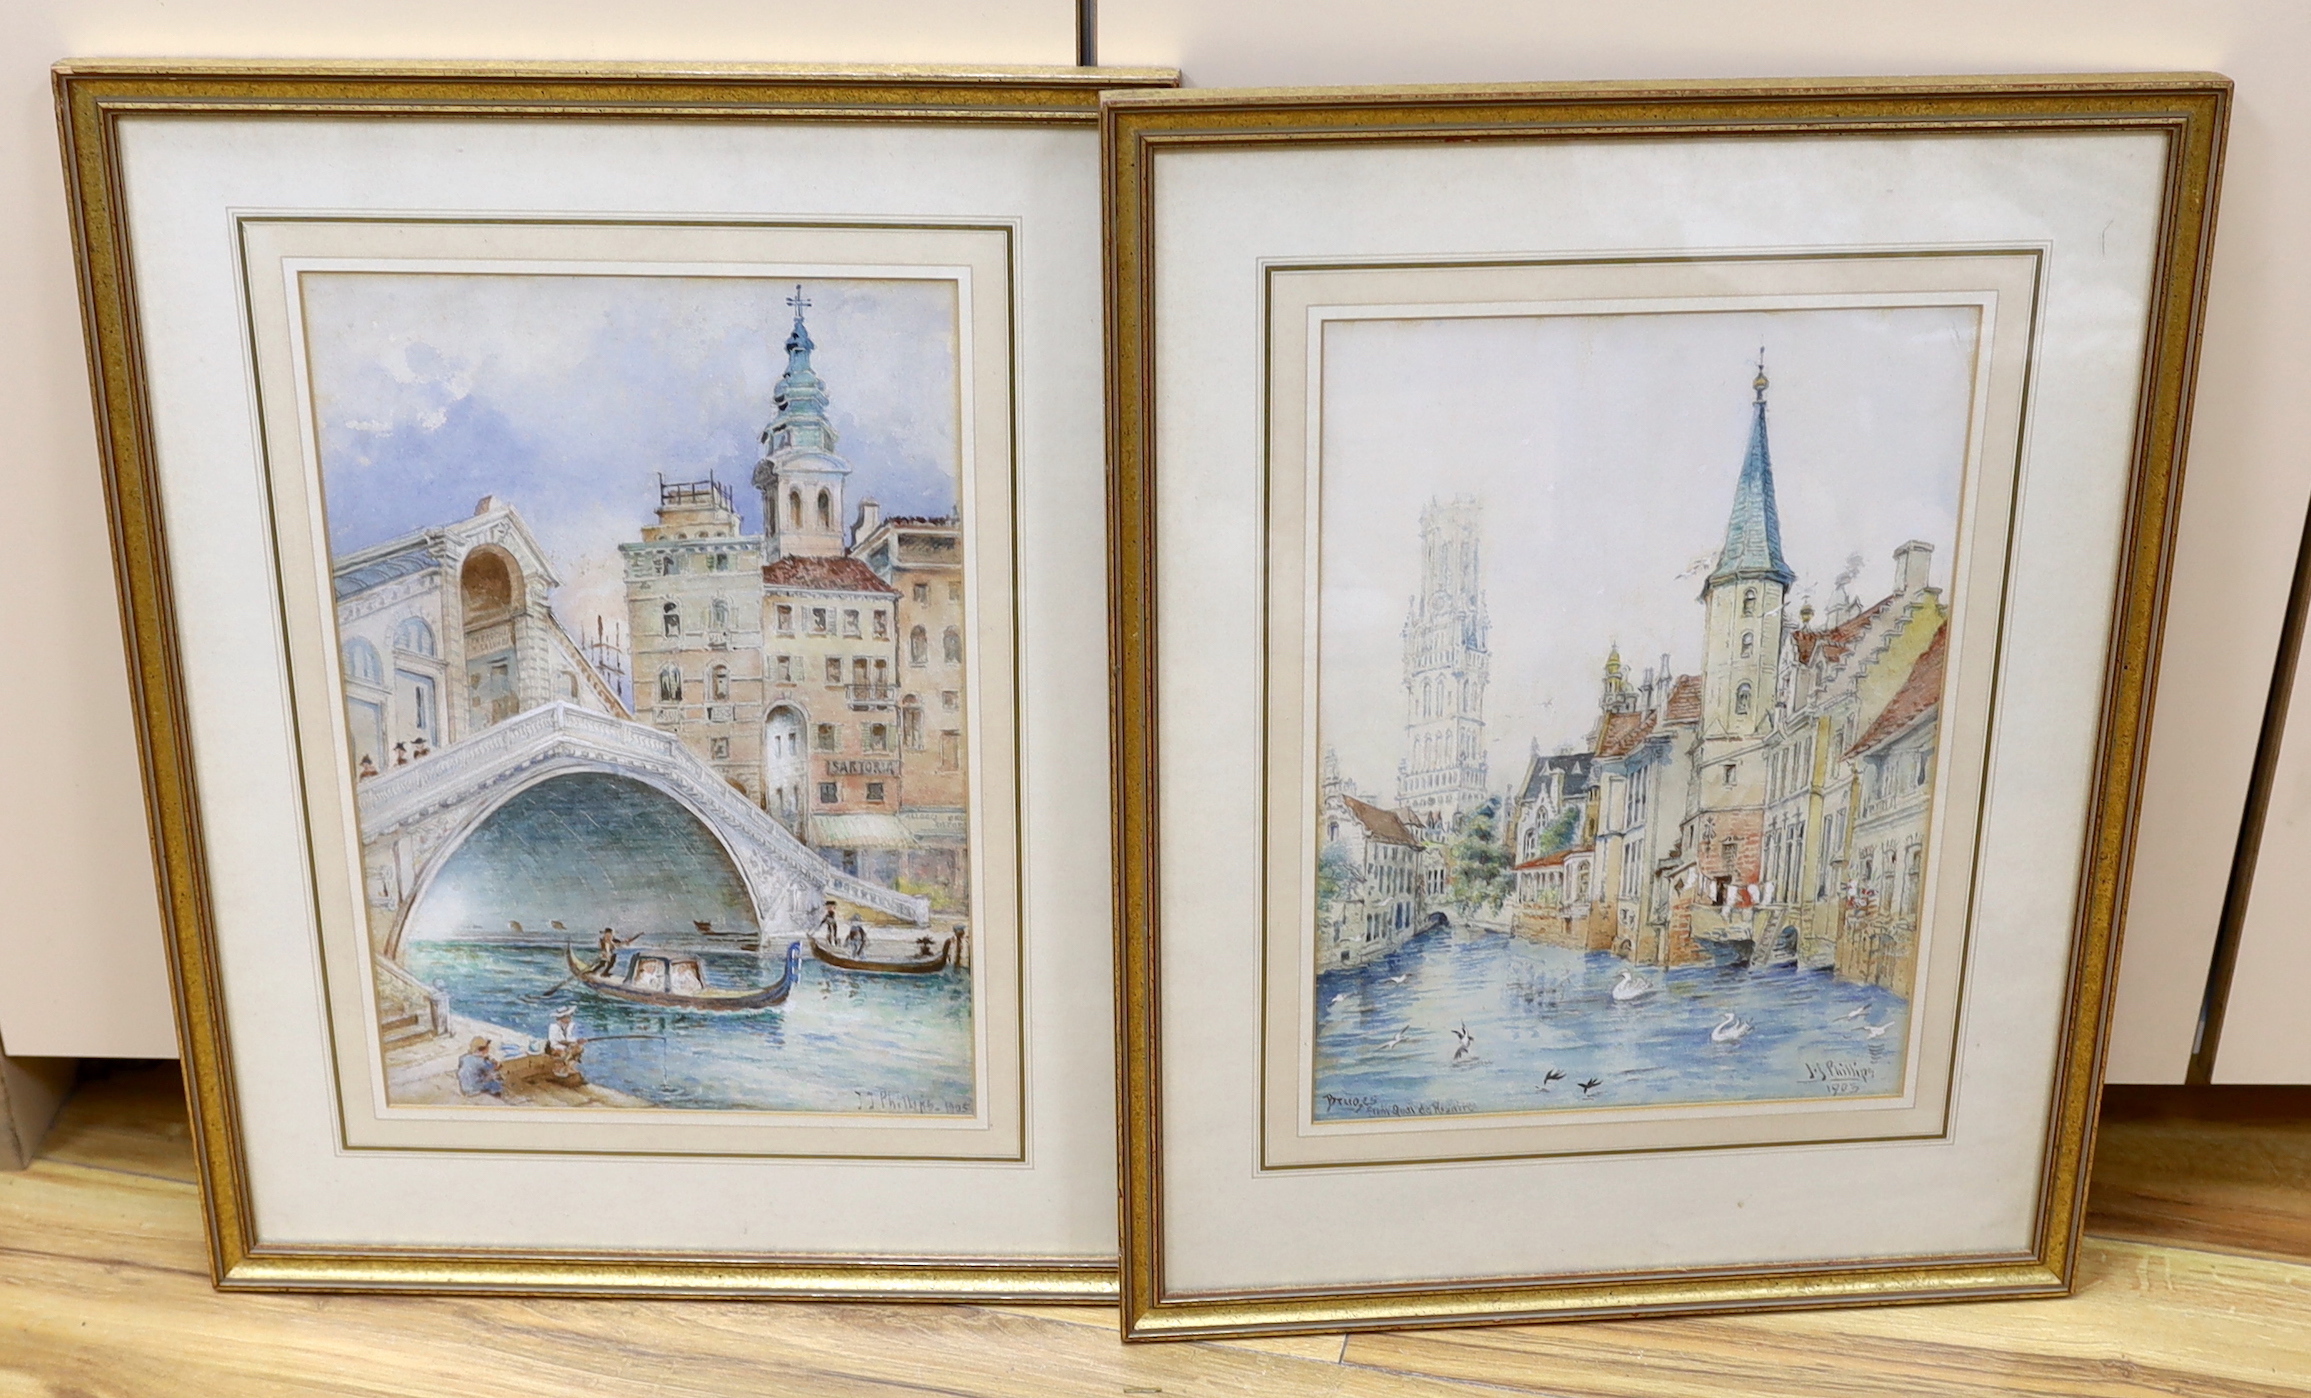 J.J.Phillips (19th / 20th. C), pair of watercolours, Bruges and Venetian canal scenes, signed and dated 1903/05, each 36 x 25cm